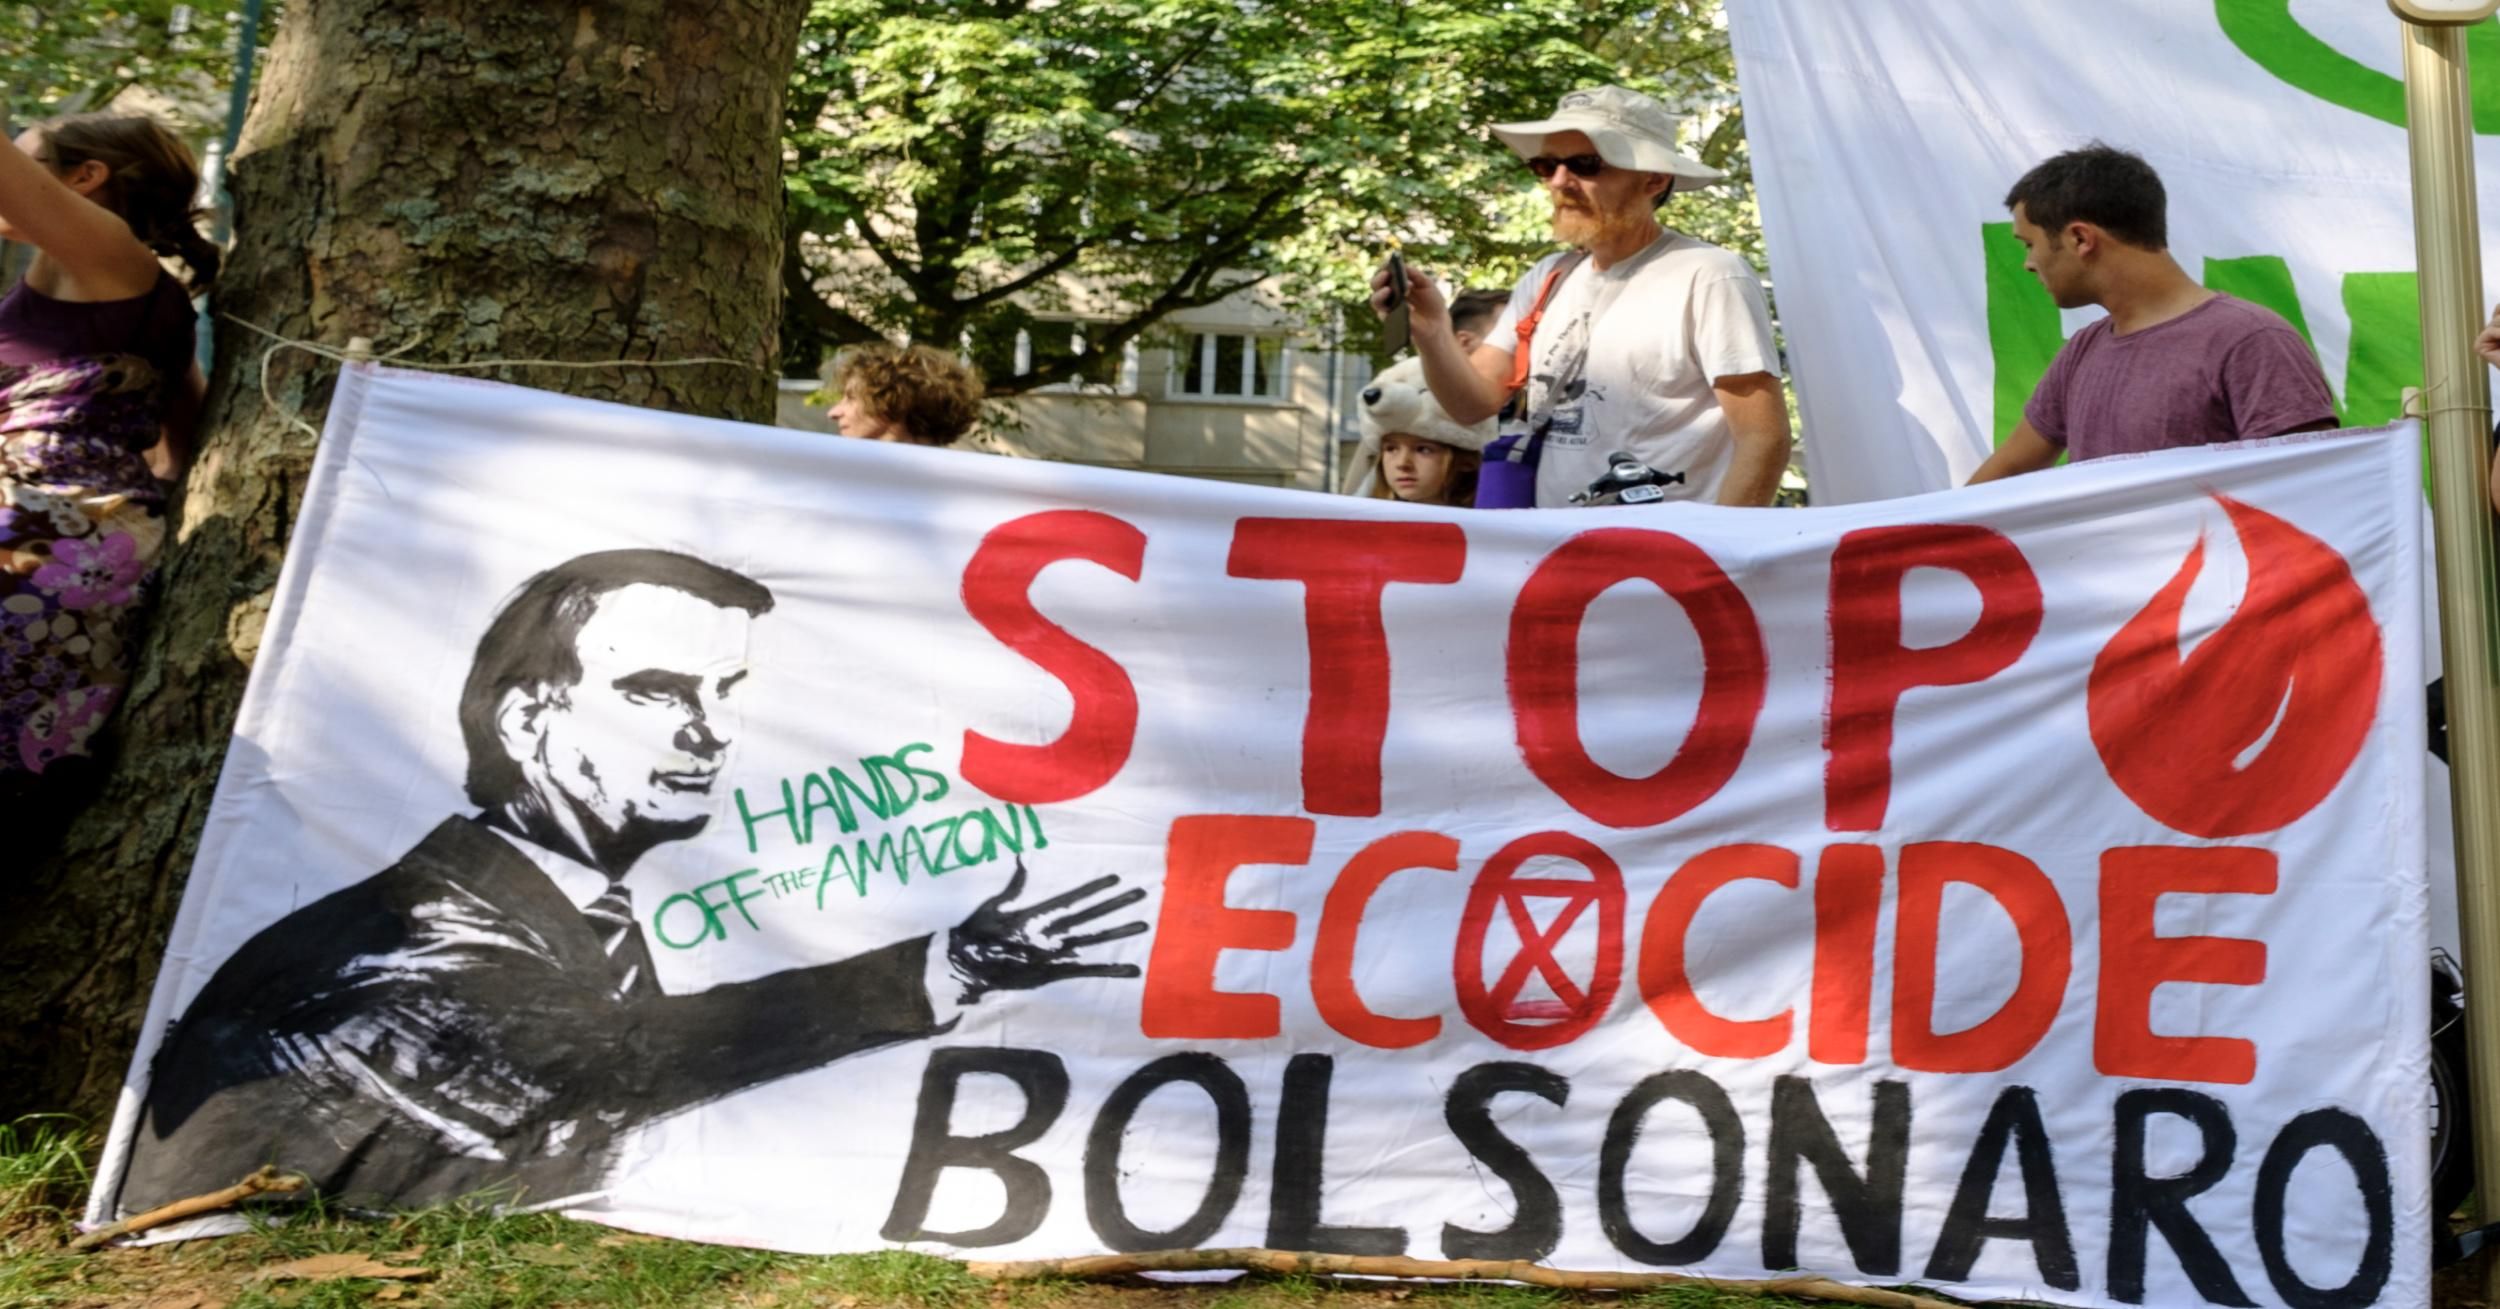 Activists gather in front of the Brazilian Embassy during a demonstration organised by Extinction Rebellion activists on August 26, 2019 in Brussels, Belgium. The protesters called on the Brazilian government to do more to tackle the the fires and deforestation in the Amazon rainforest. (Photo: Thierry Monasse/Getty Images)